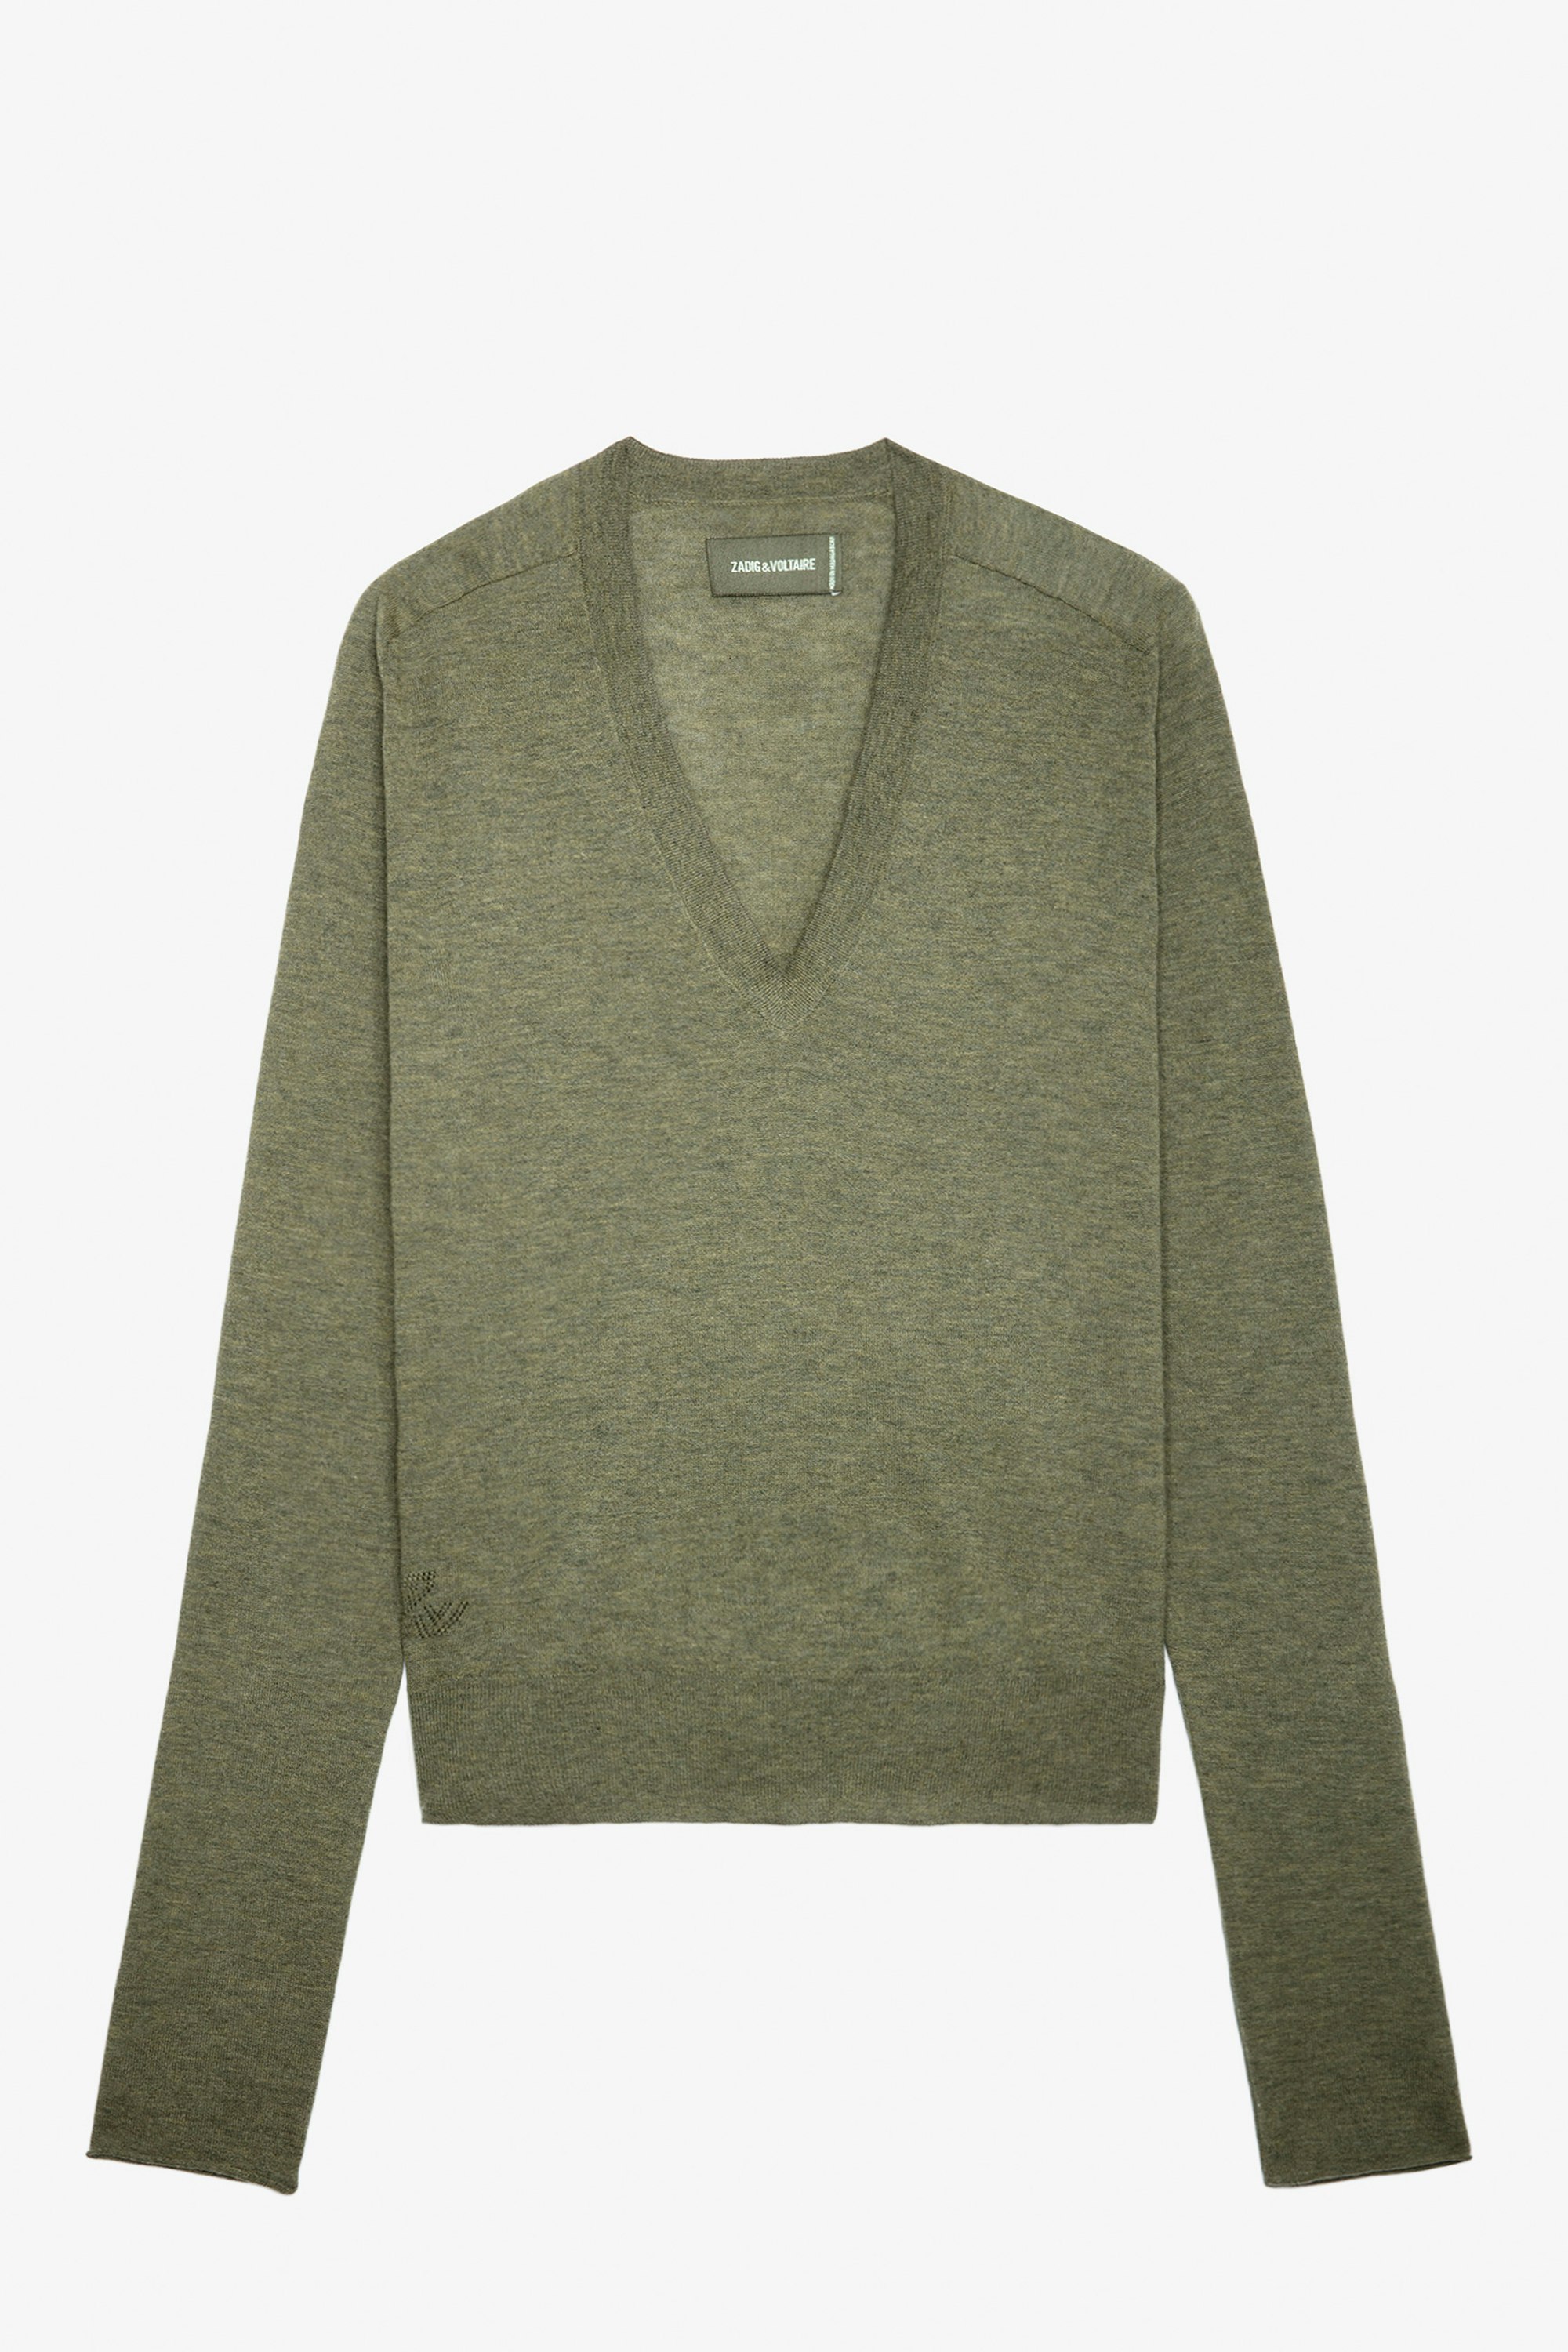 River Cashmere Jumper - Women's khaki feather cashmere jumper with V neckline and long sleeves.